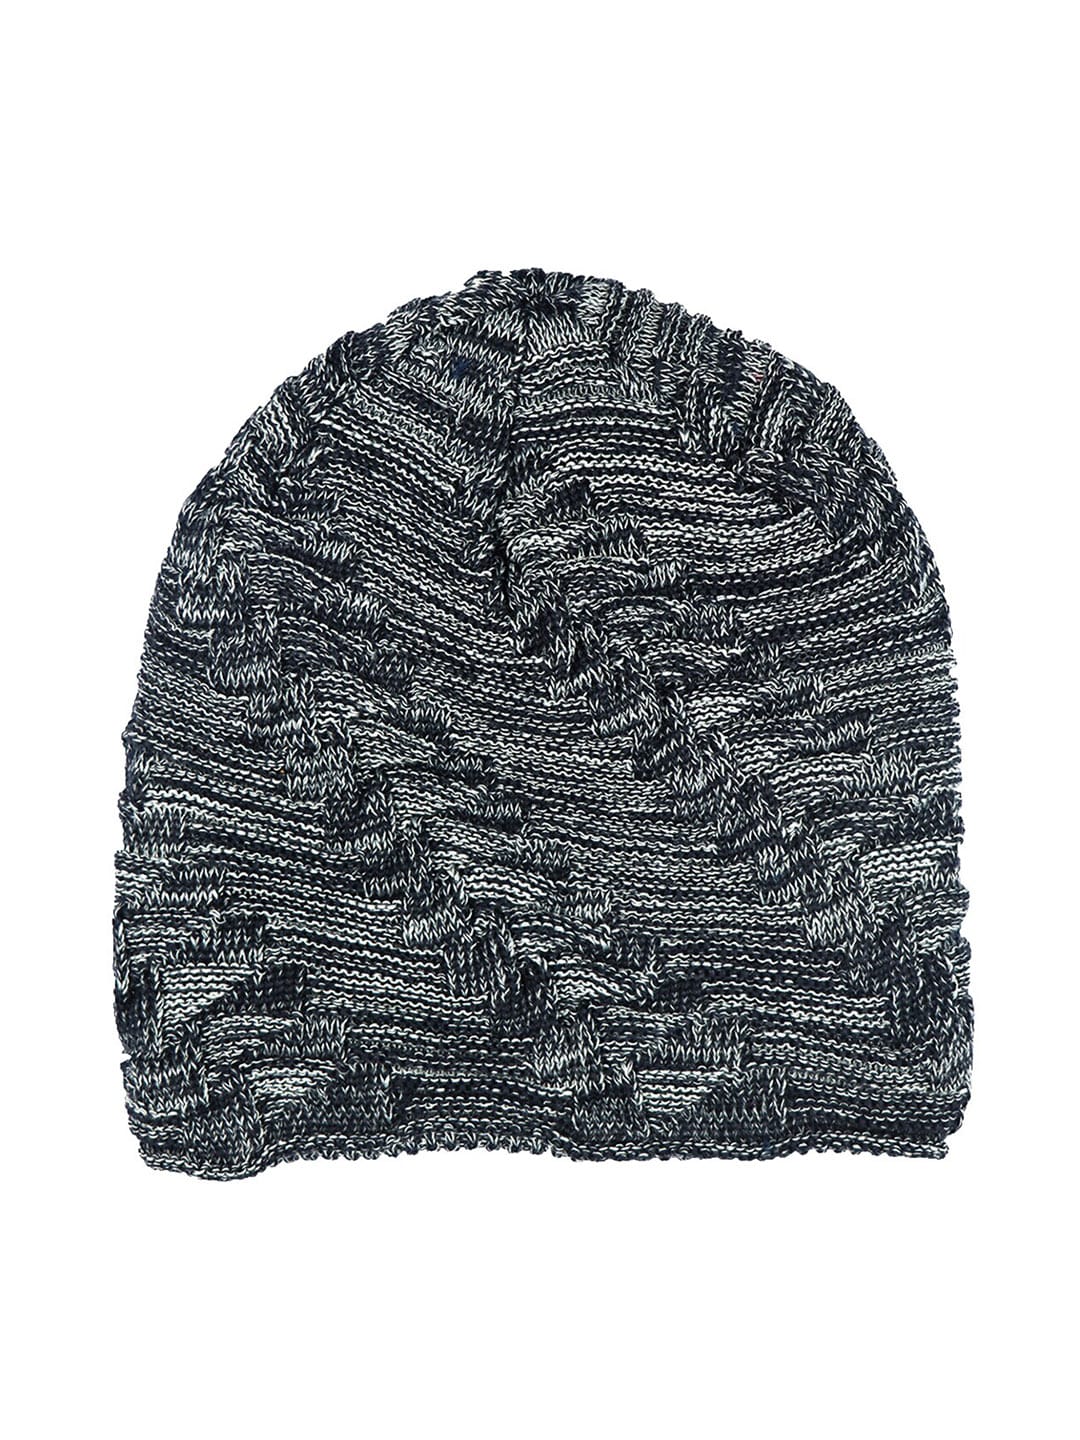 iSWEVEN Unisex Charcoal Grey Self Design Beanie Price in India